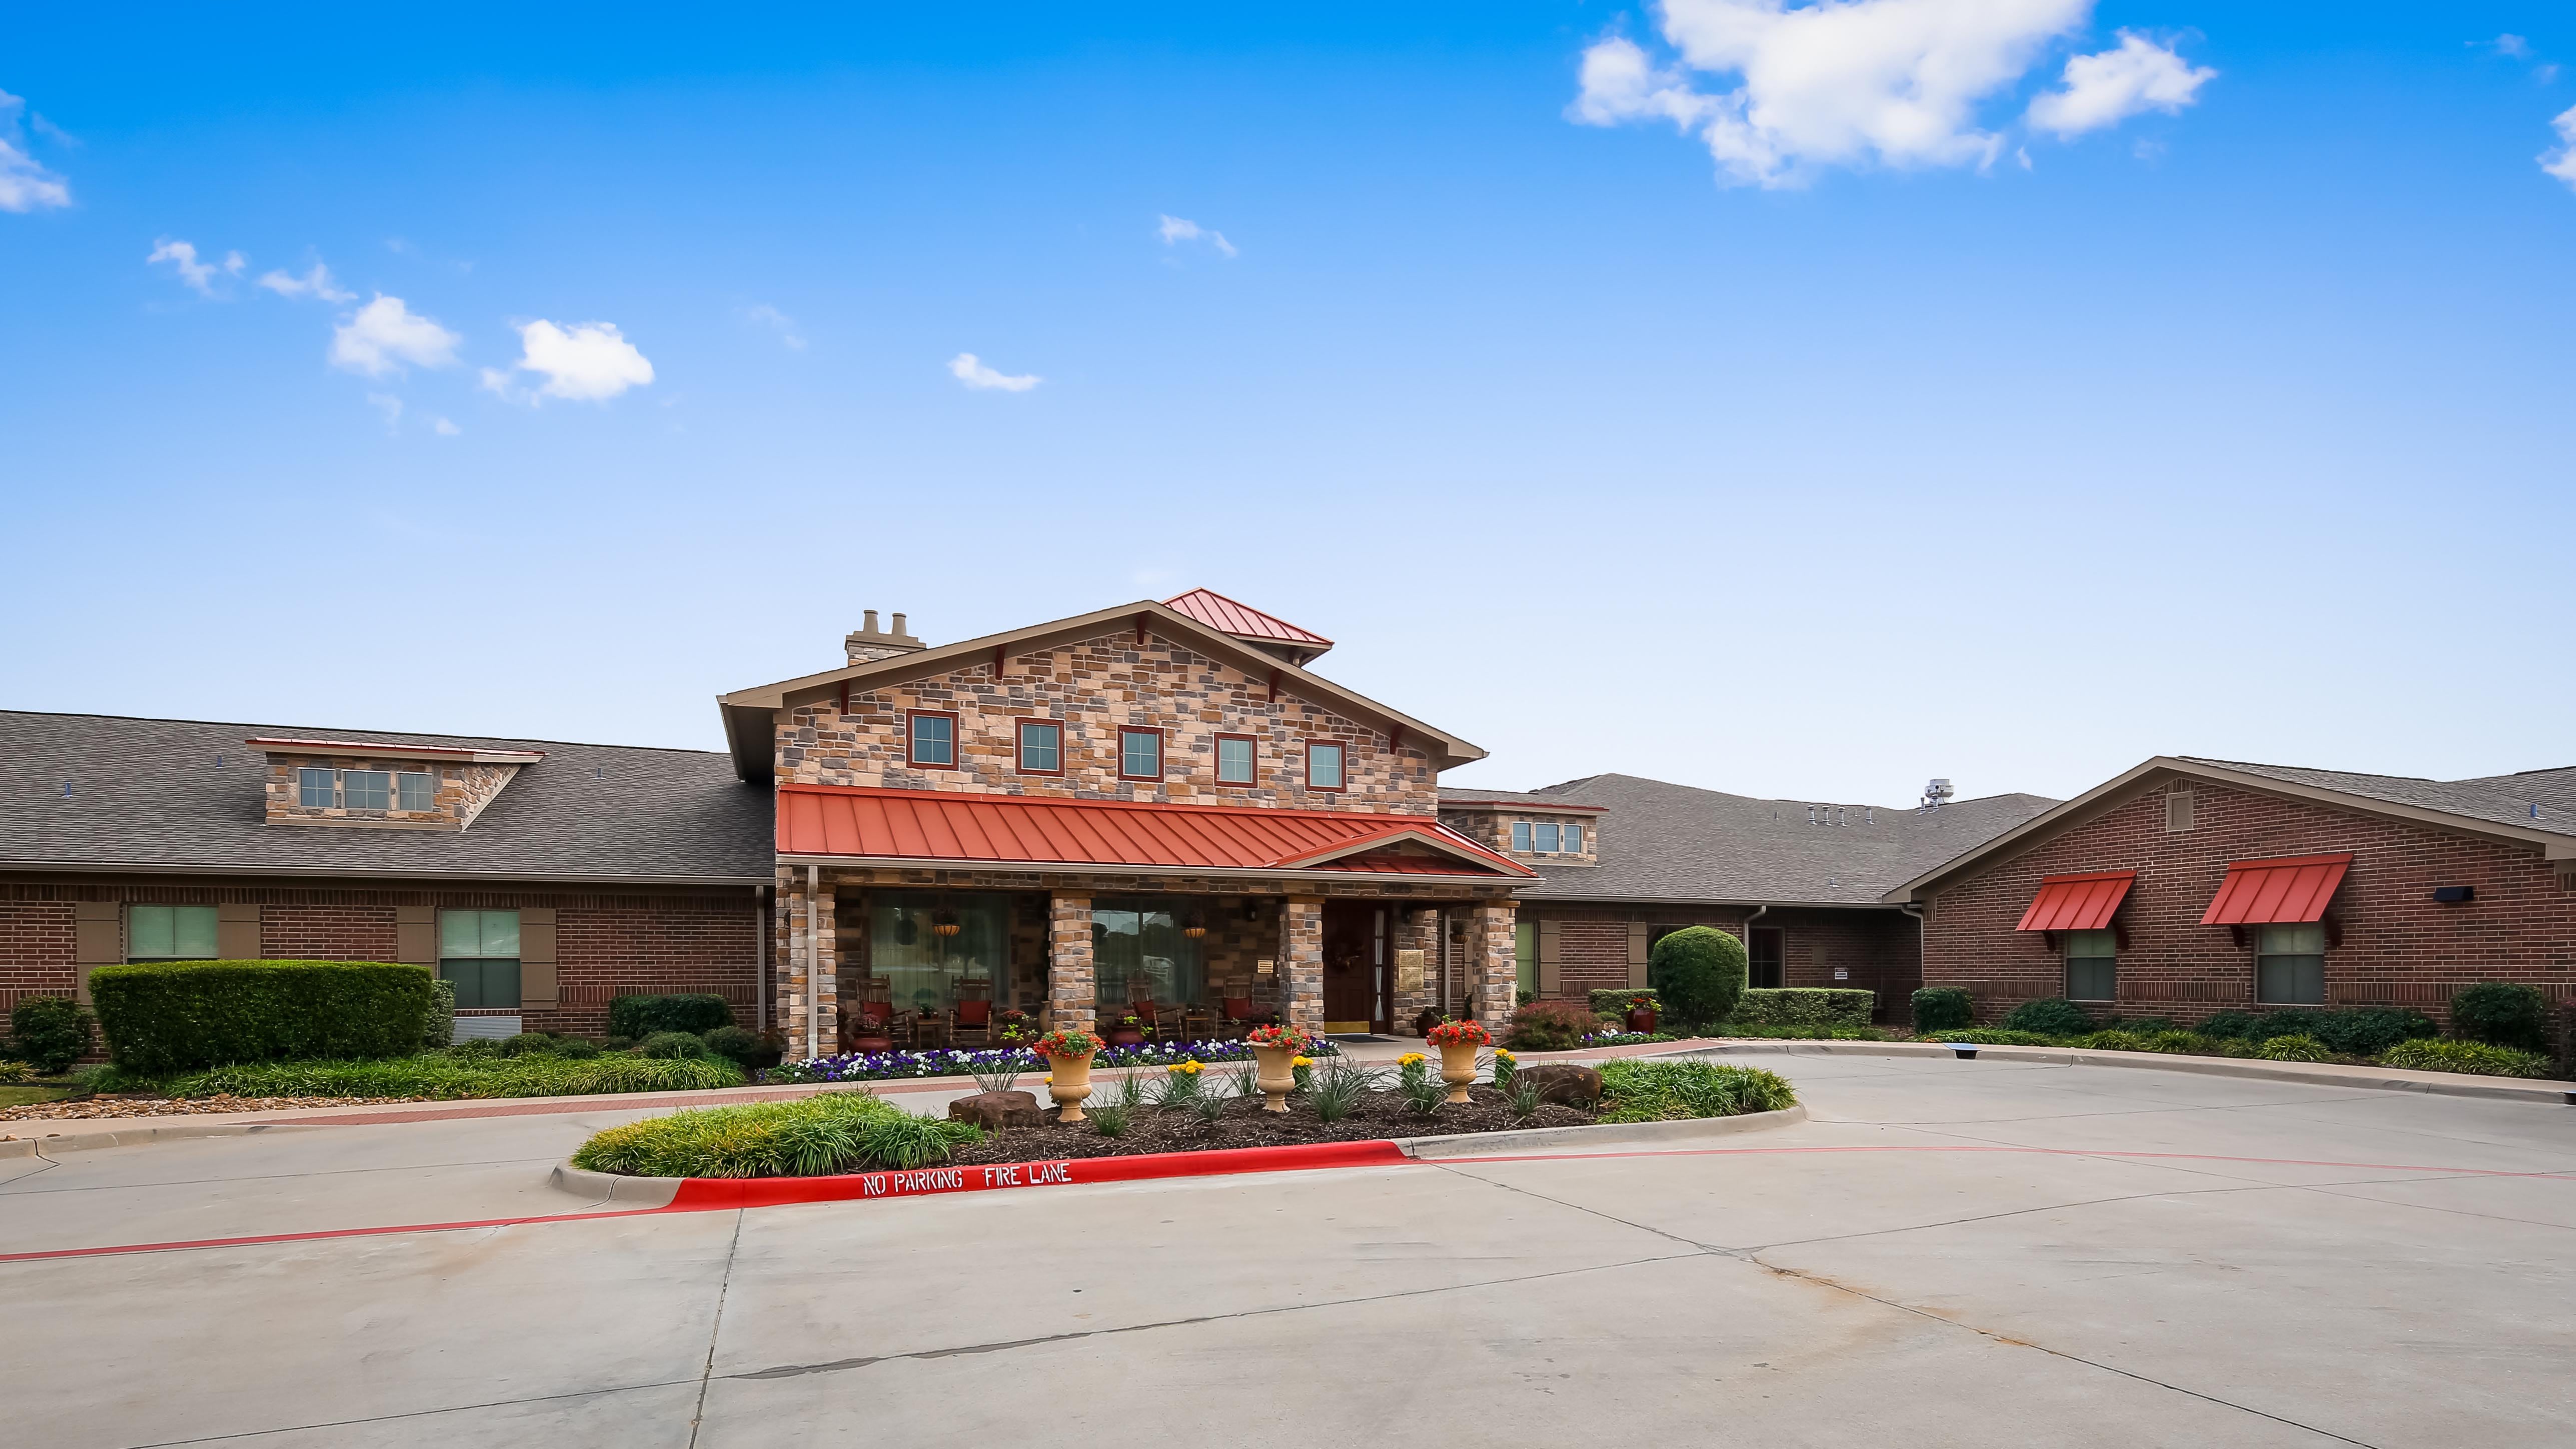 Willow Bend Assisted Living & Memory Care community exterior